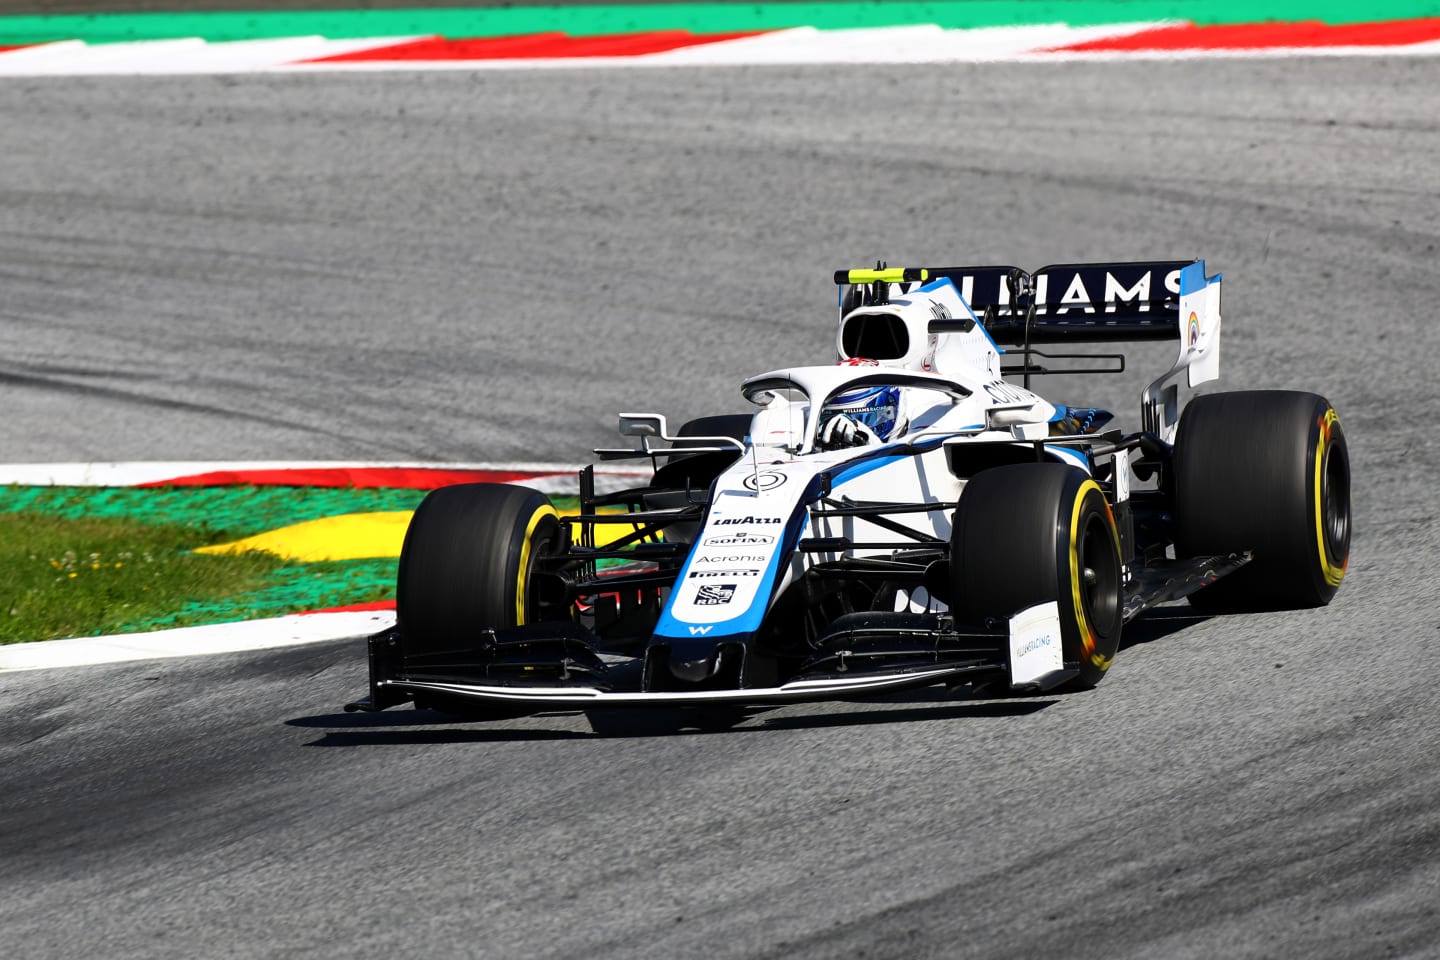 SPIELBERG, AUSTRIA - JULY 05: Nicholas Latifi of Canada driving the (6) Williams Racing FW43 Mercedes during the Formula One Grand Prix of Austria at Red Bull Ring on July 05, 2020 in Spielberg, Austria. (Photo by Mark Thompson/Getty Images)